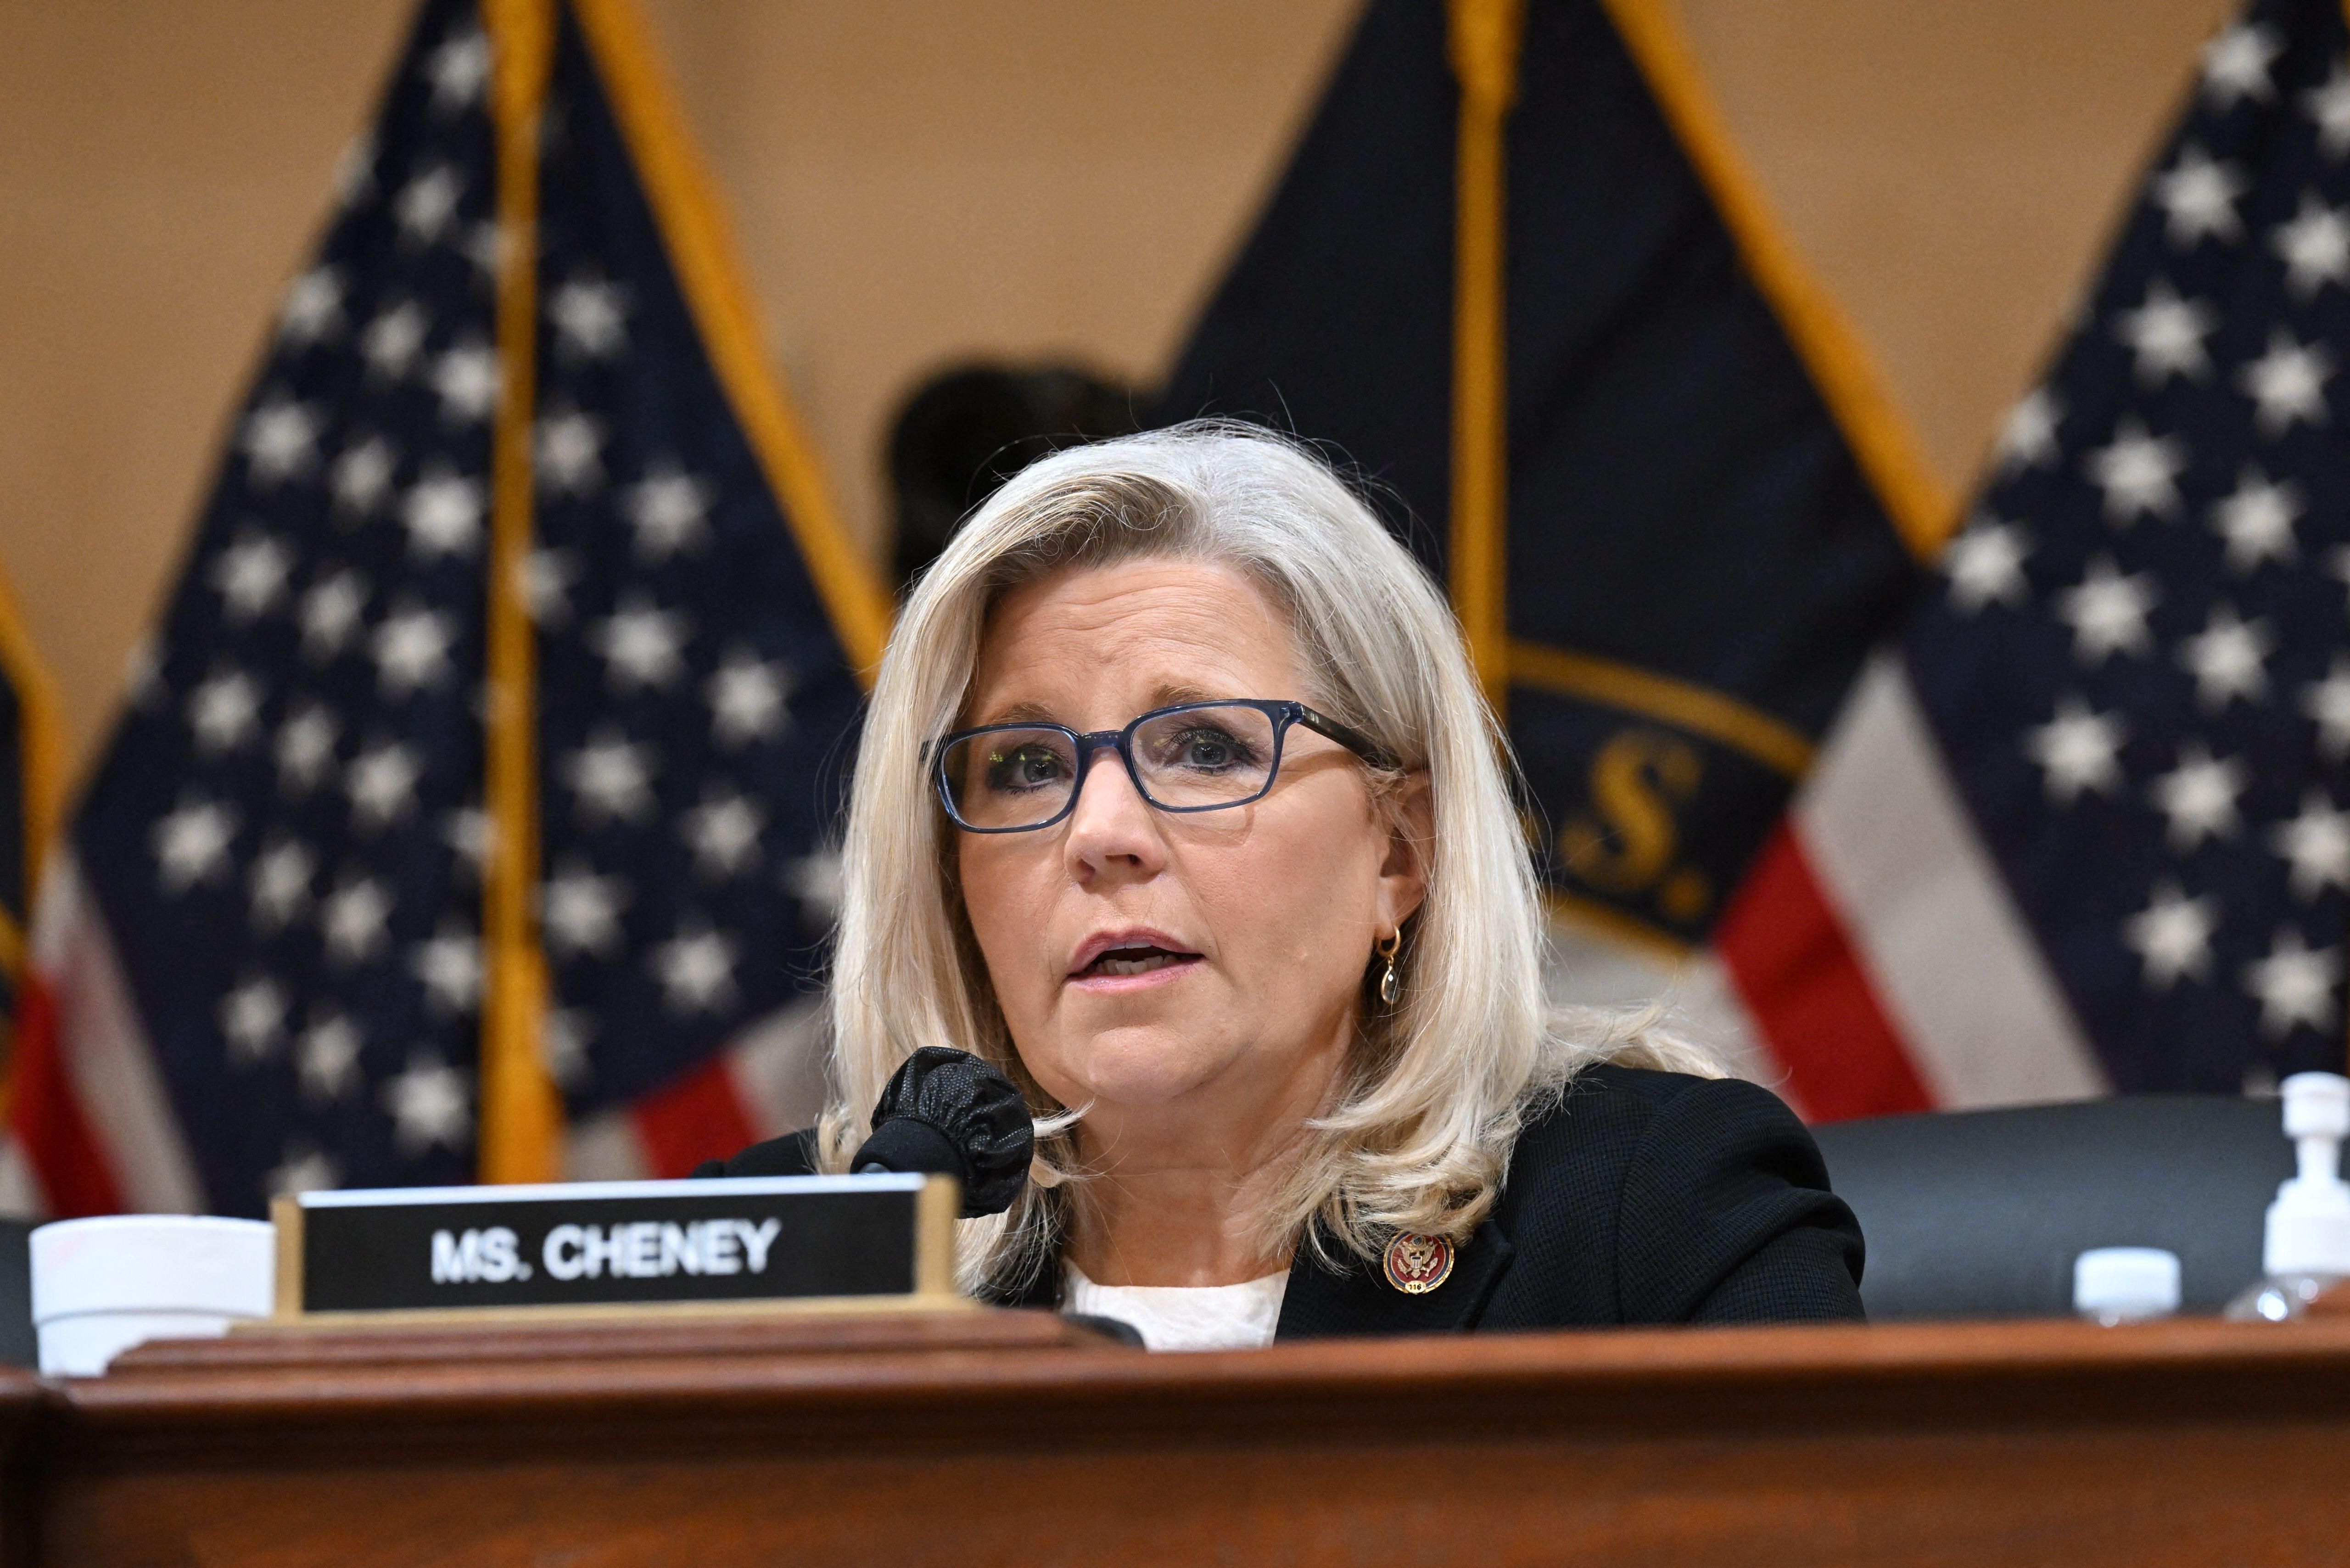 Rep. Liz Cheney (R-Wyo.) speaks during a House January 6 committee hearing on July 12, 2022 in Washington, D.C.